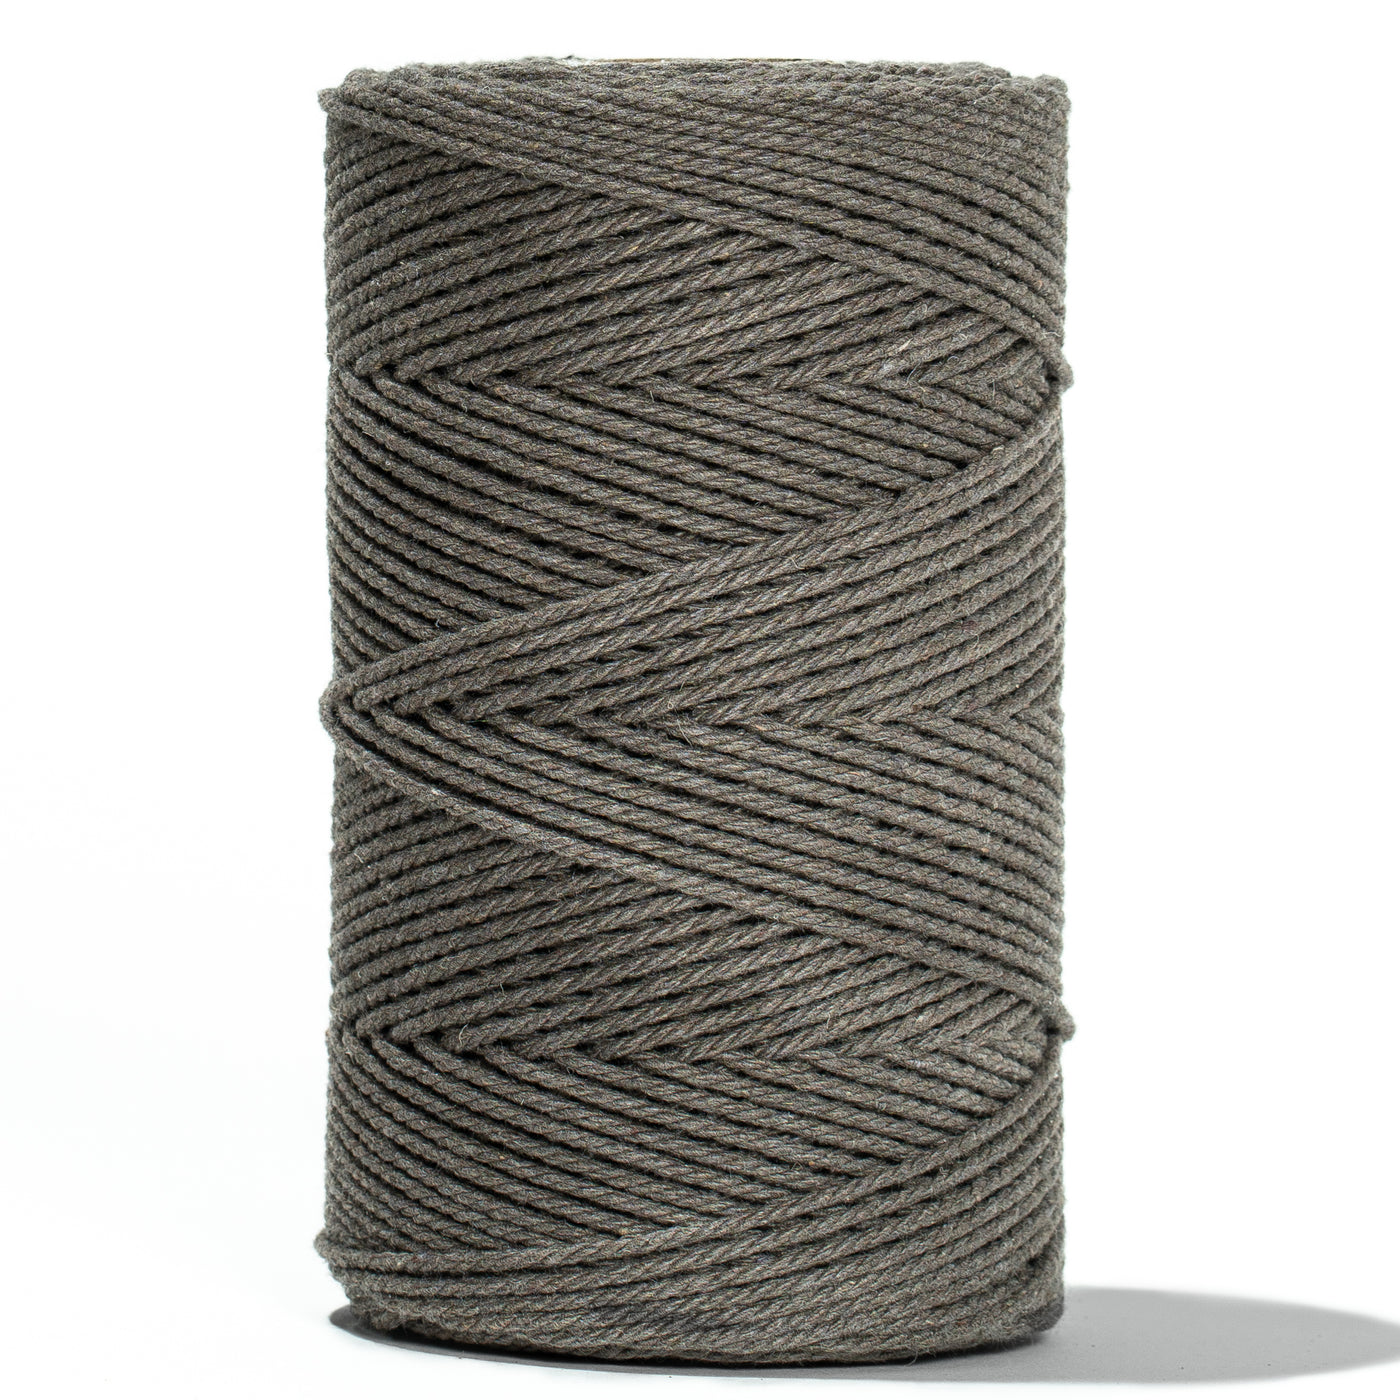 COTTON ROPE ZERO WASTE 2 MM - 3 PLY - DARK TAUPE COLOR